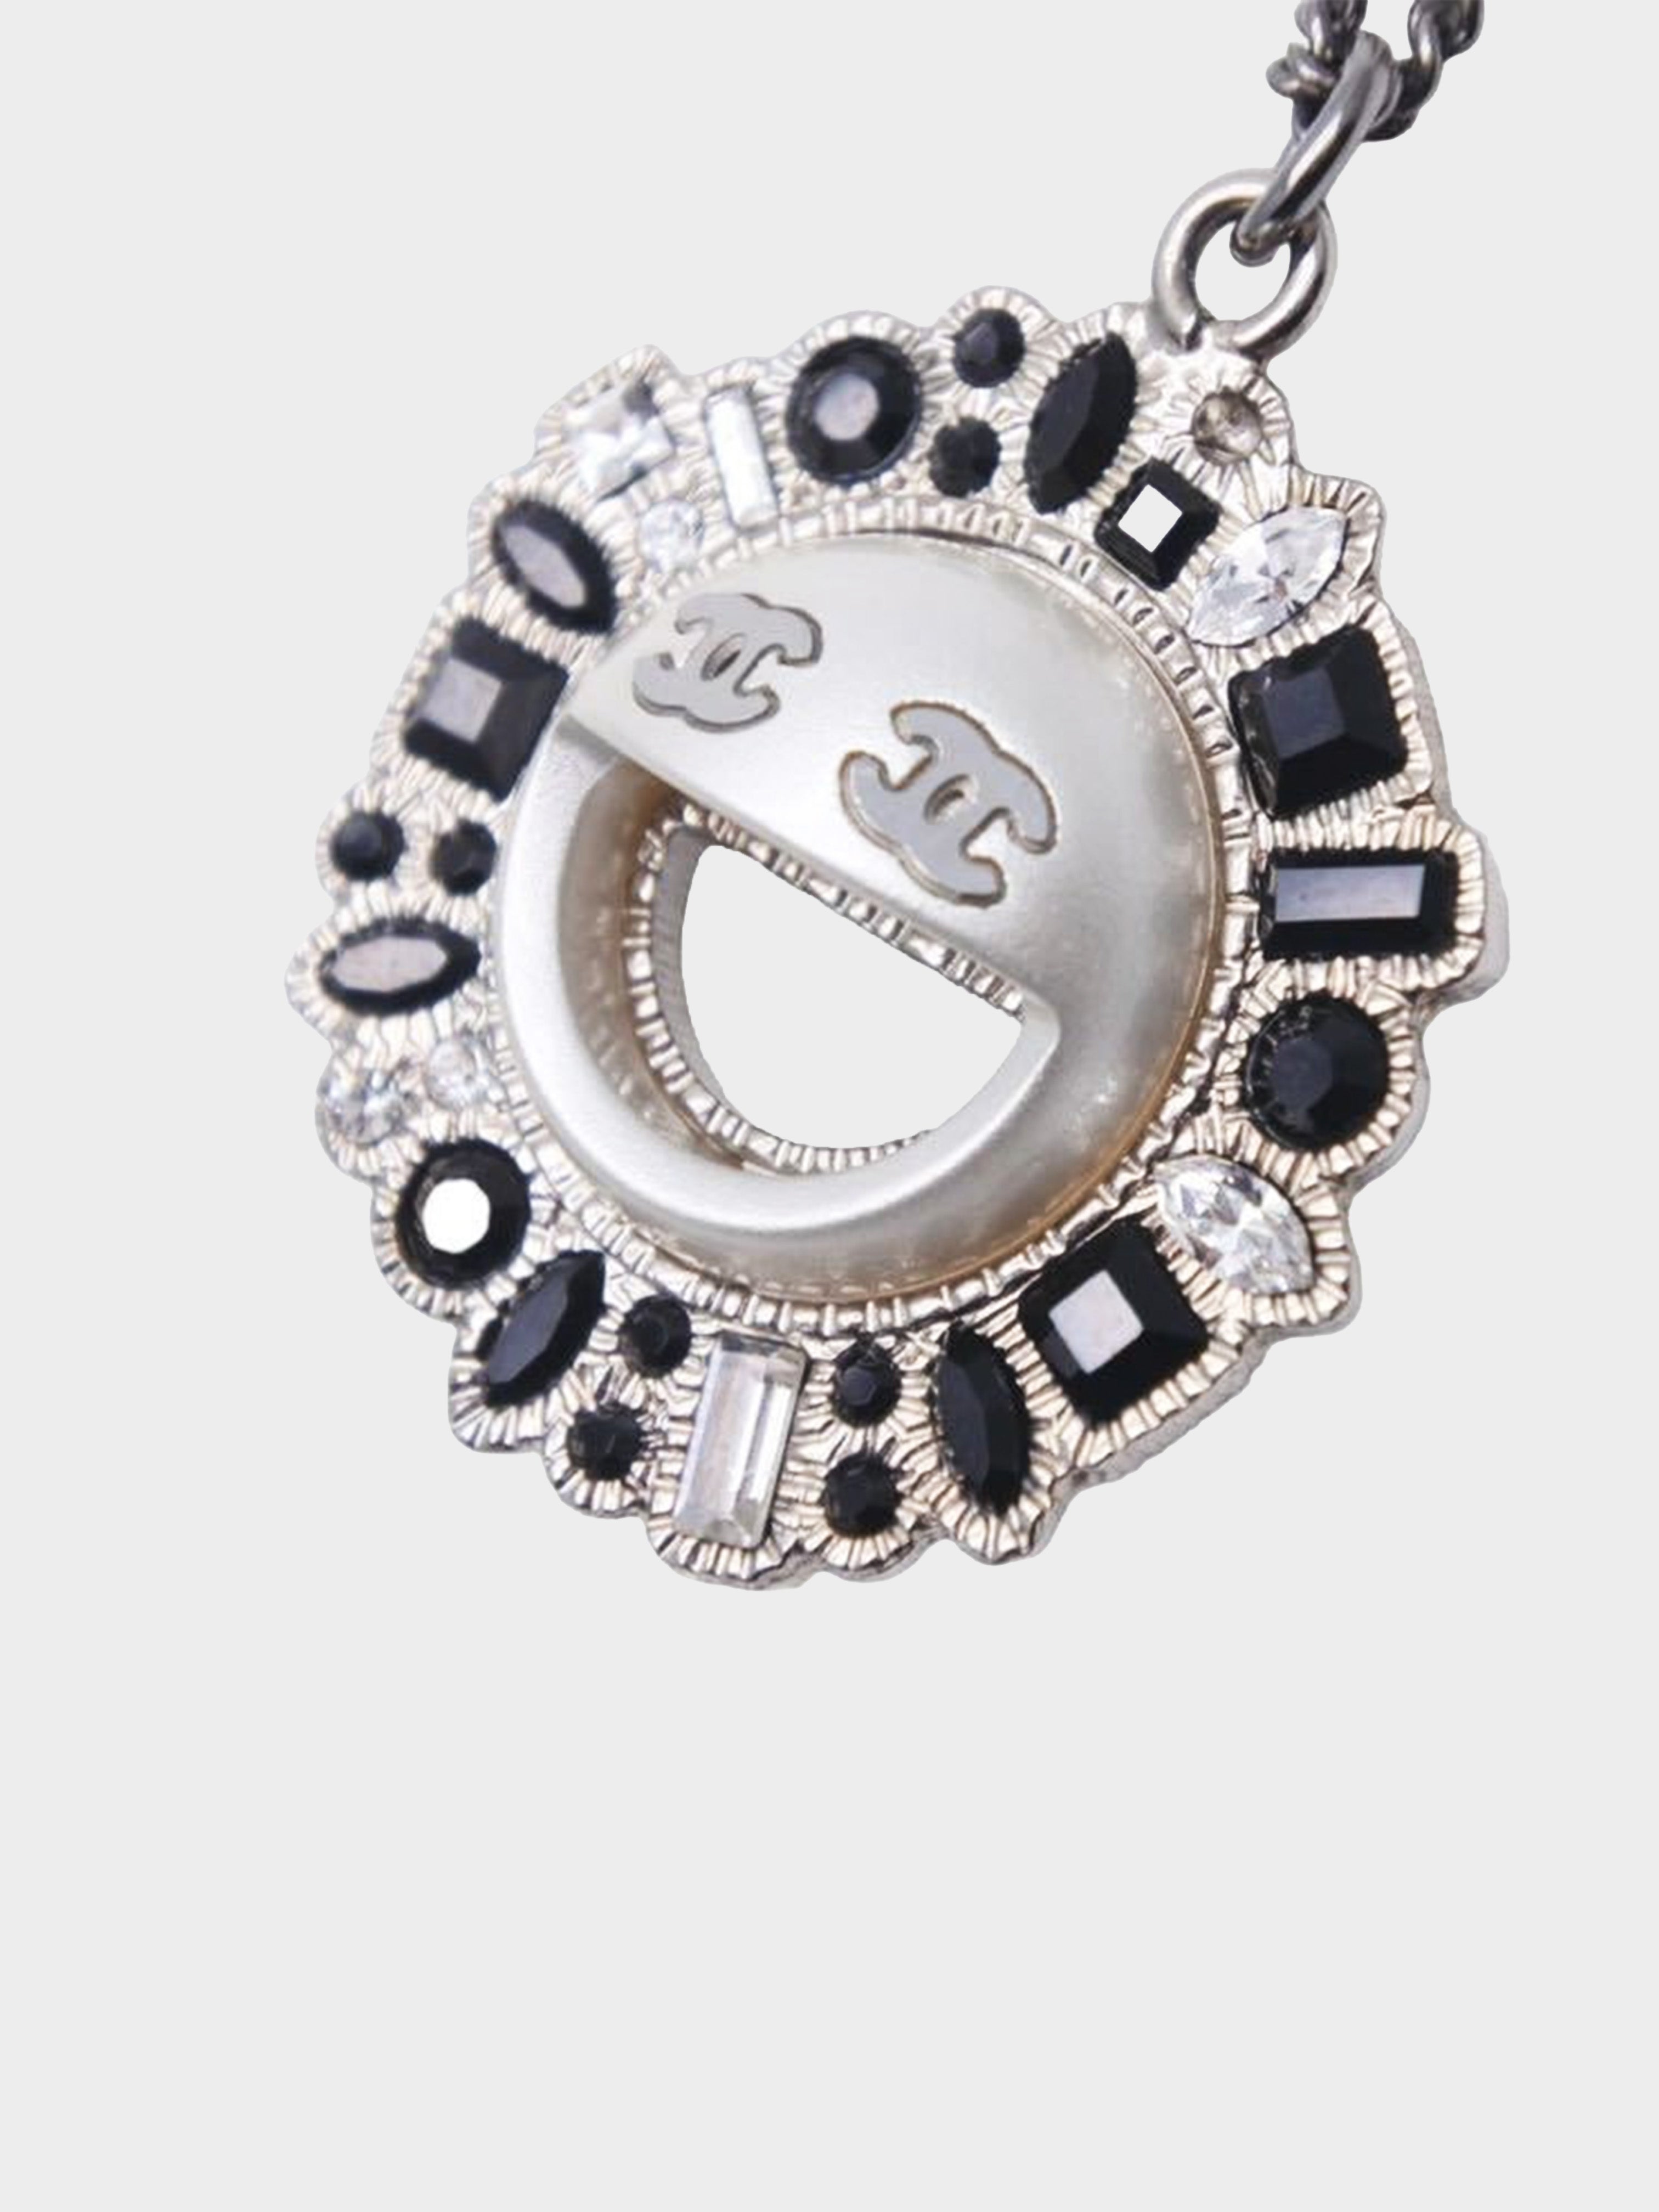 Chanel Fall 2016 Smiley Face Emoji Necklace